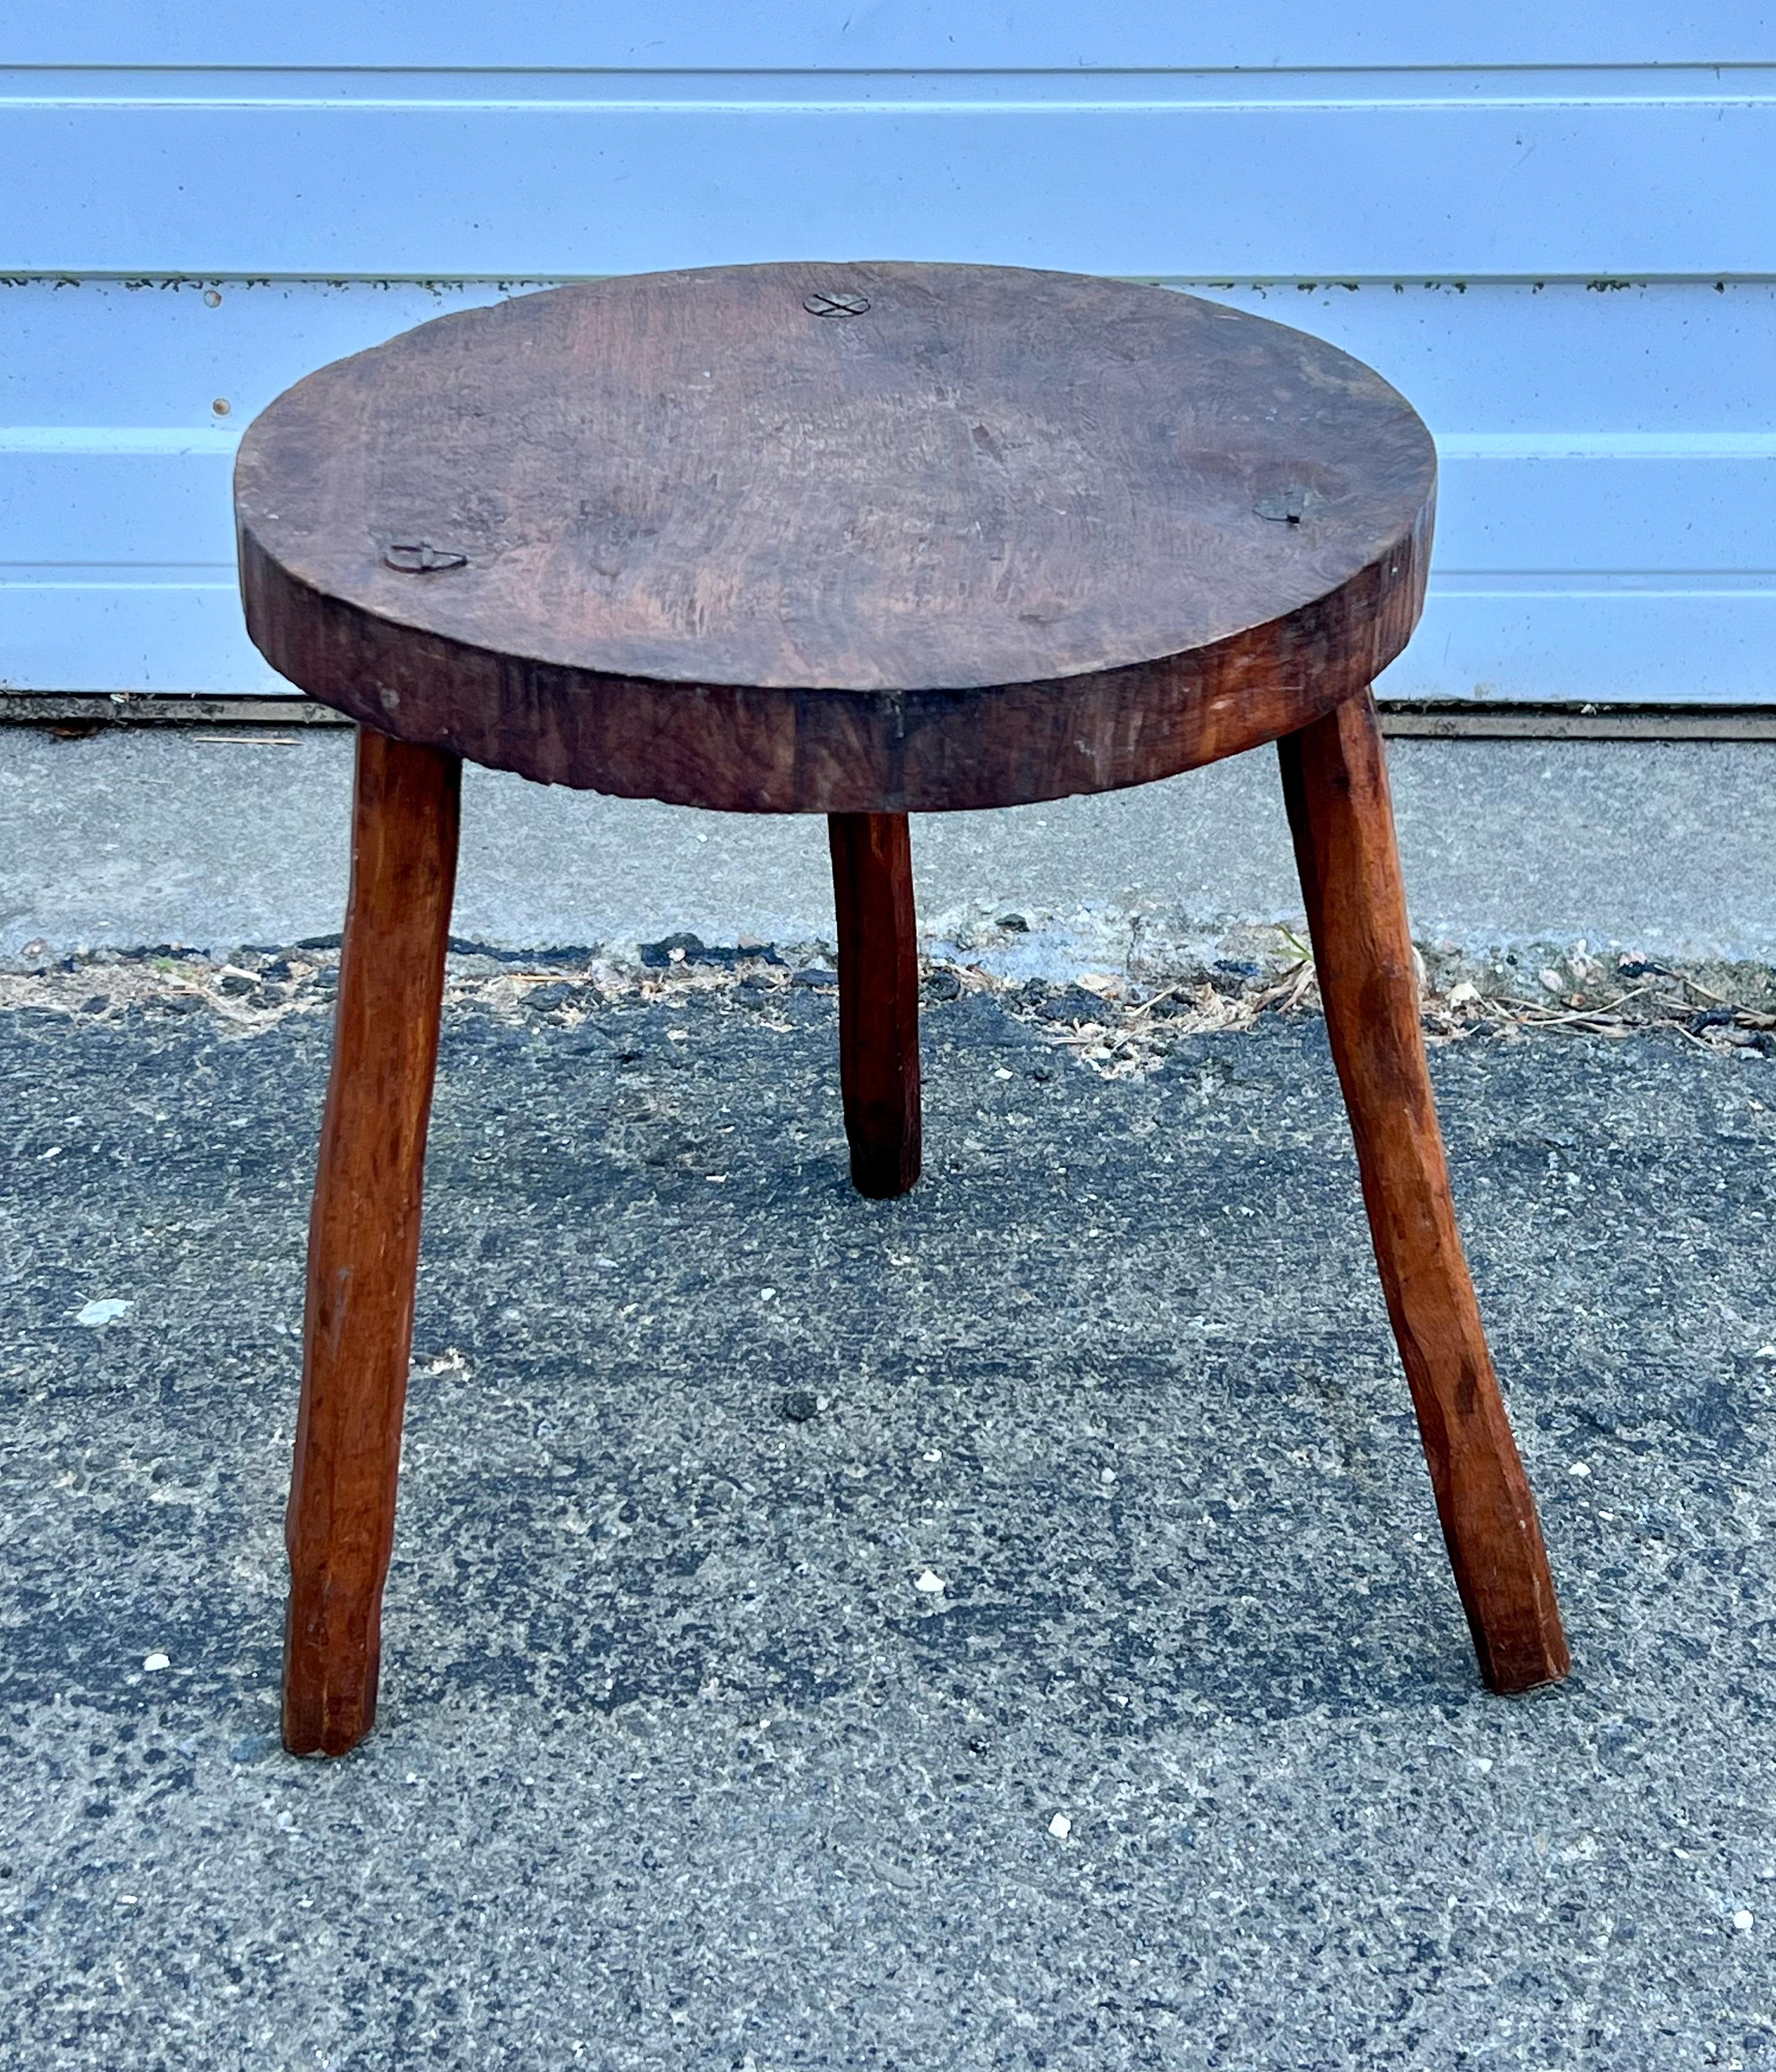 19th Century Low-Legged Joint Stool  In Good Condition For Sale In Nantucket, MA